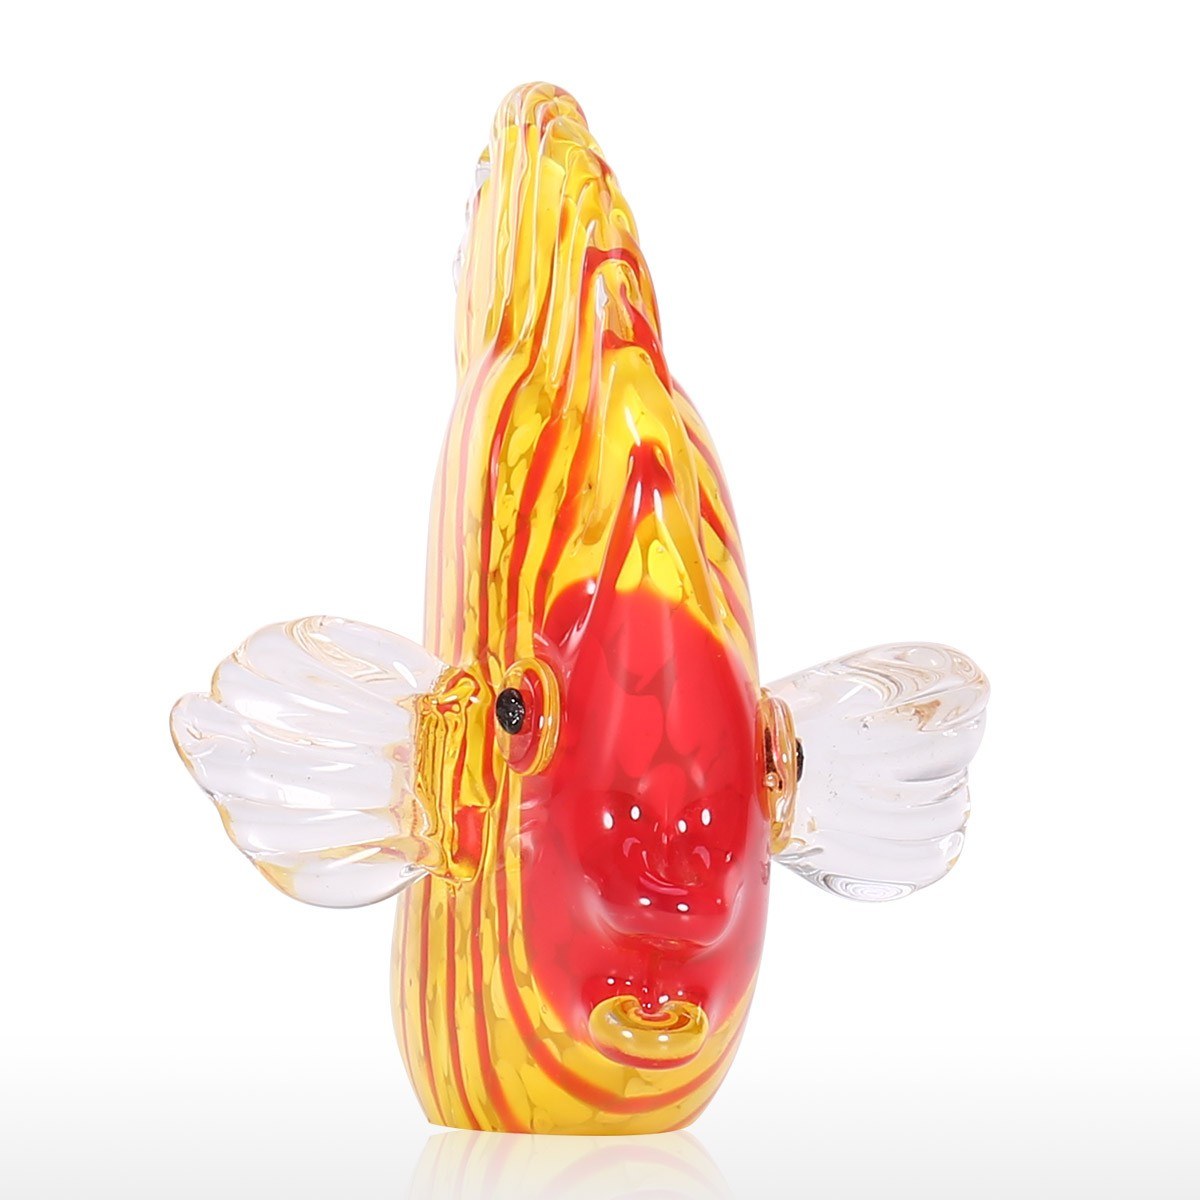 Tropical Fish with Red and Yellow for Fish Decor and Blown Glass Fish